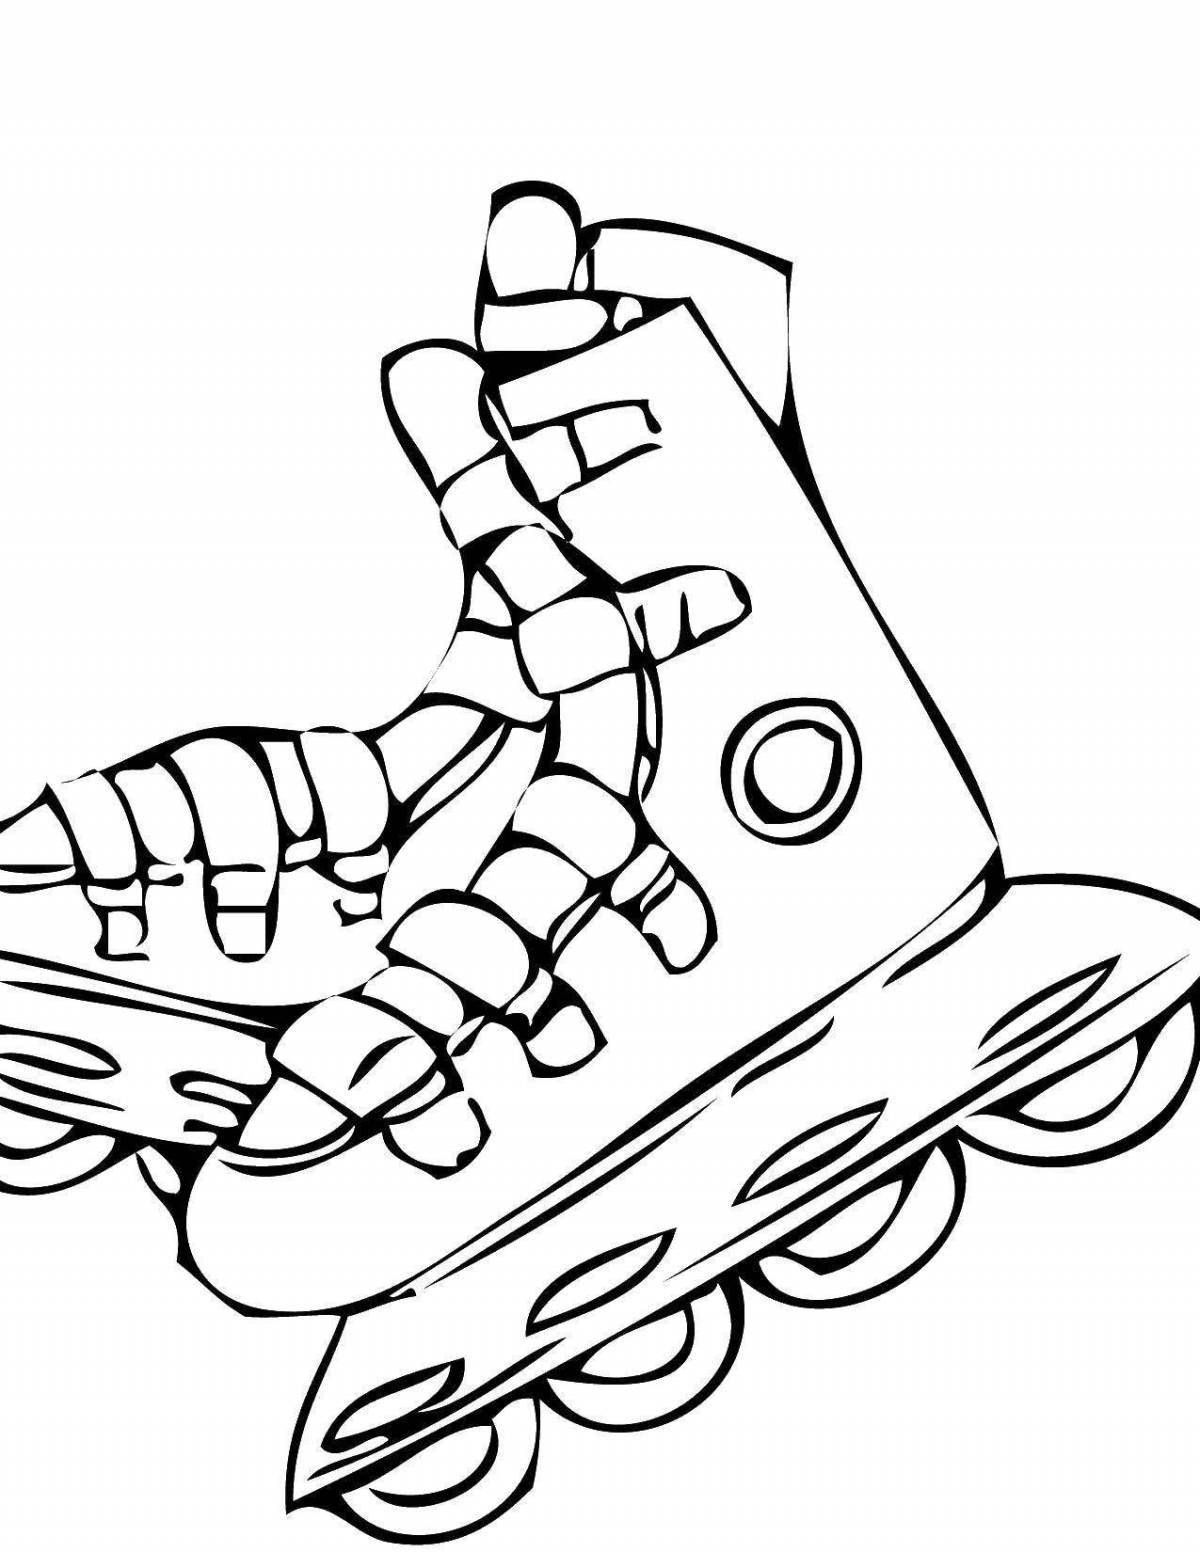 Amazing skates coloring book for kids 5-6 years old